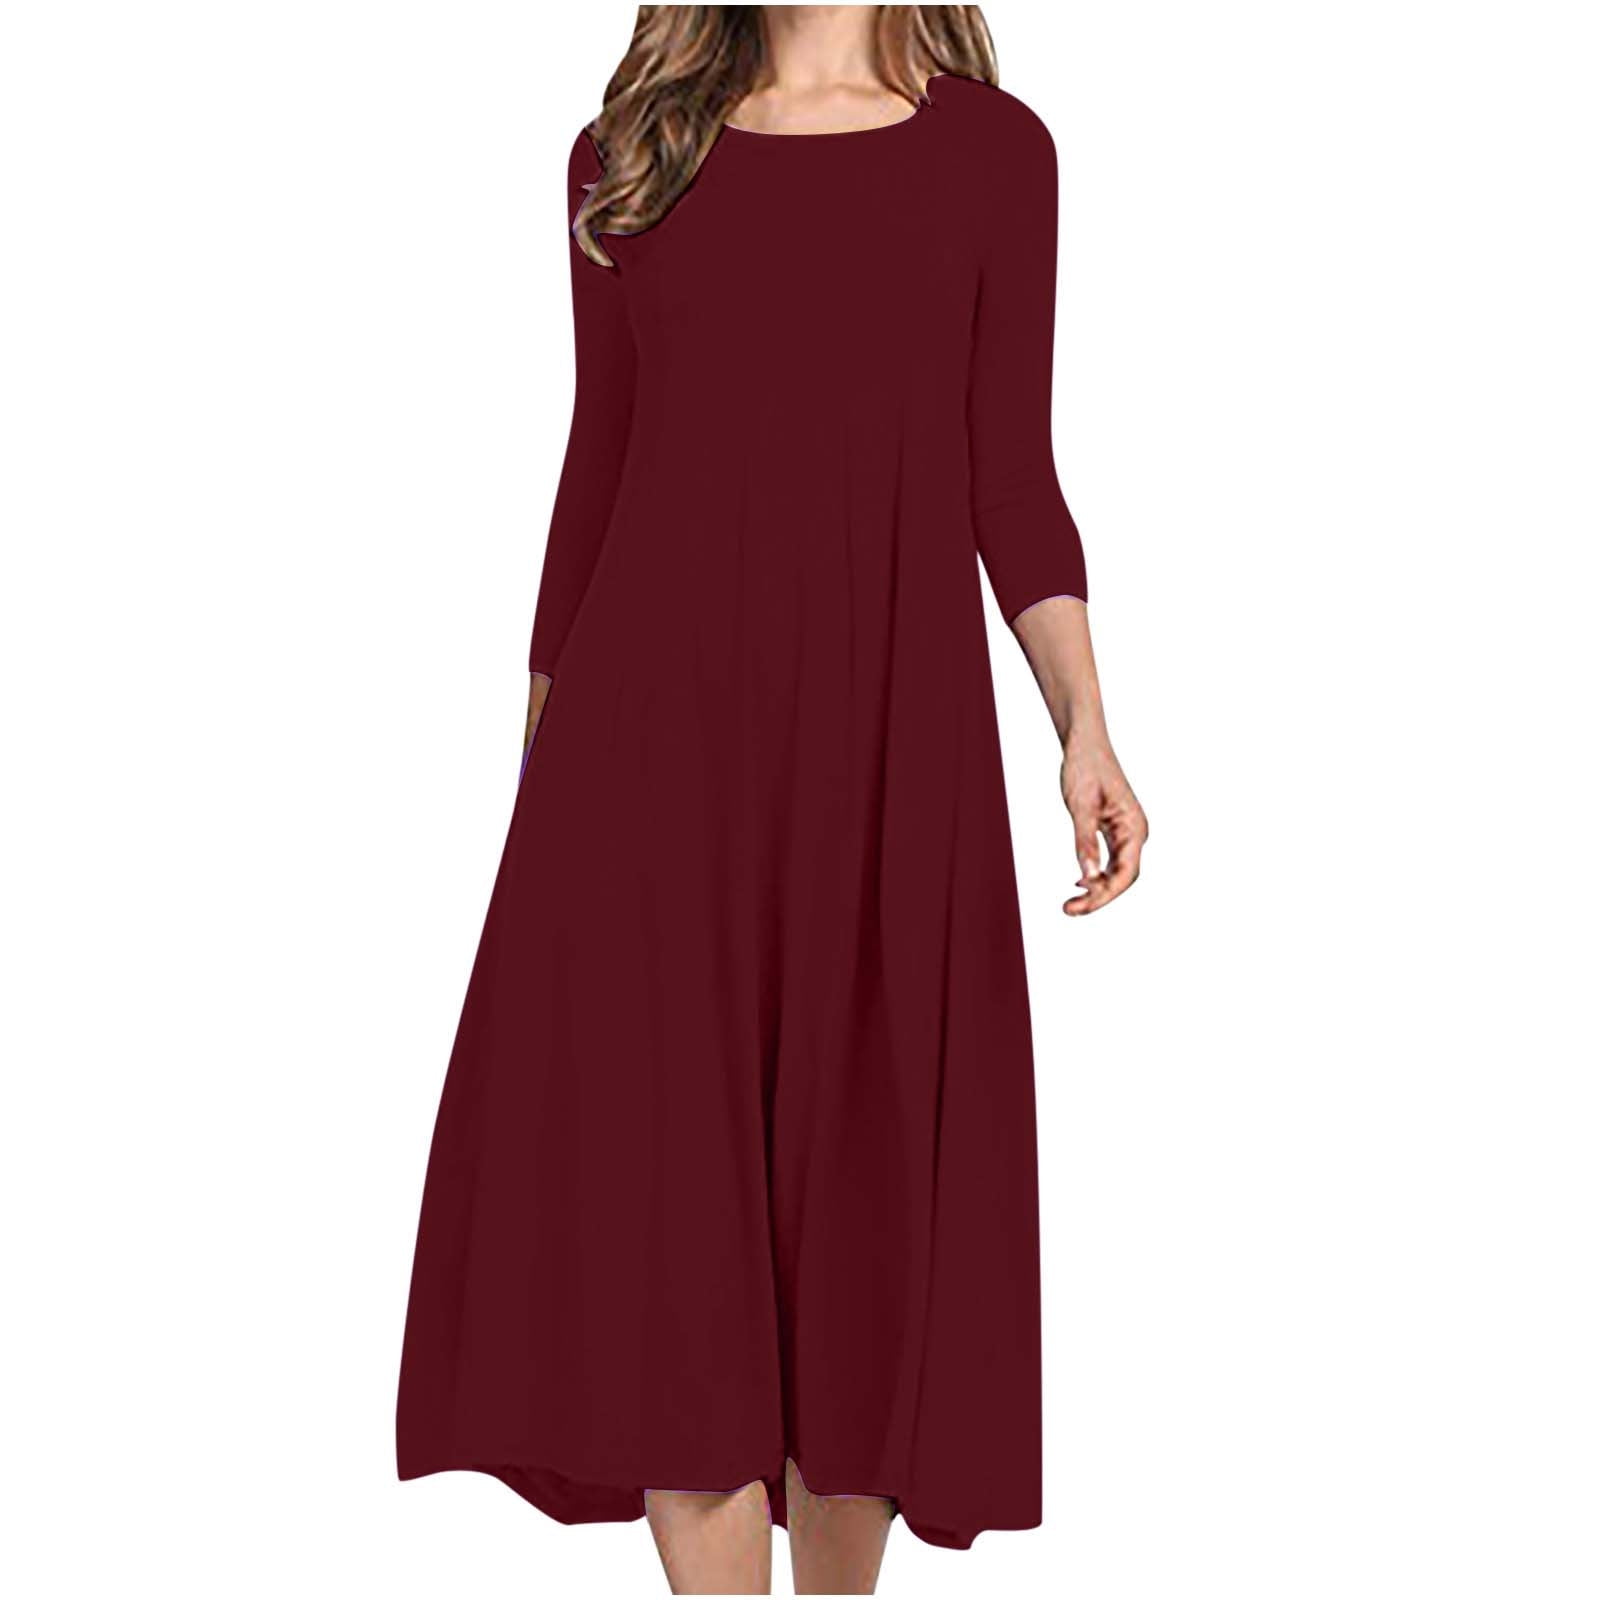 HTNBO 3/4 Sleeve Midi Dress for Women Casual Fall Crew Neck Loose ...